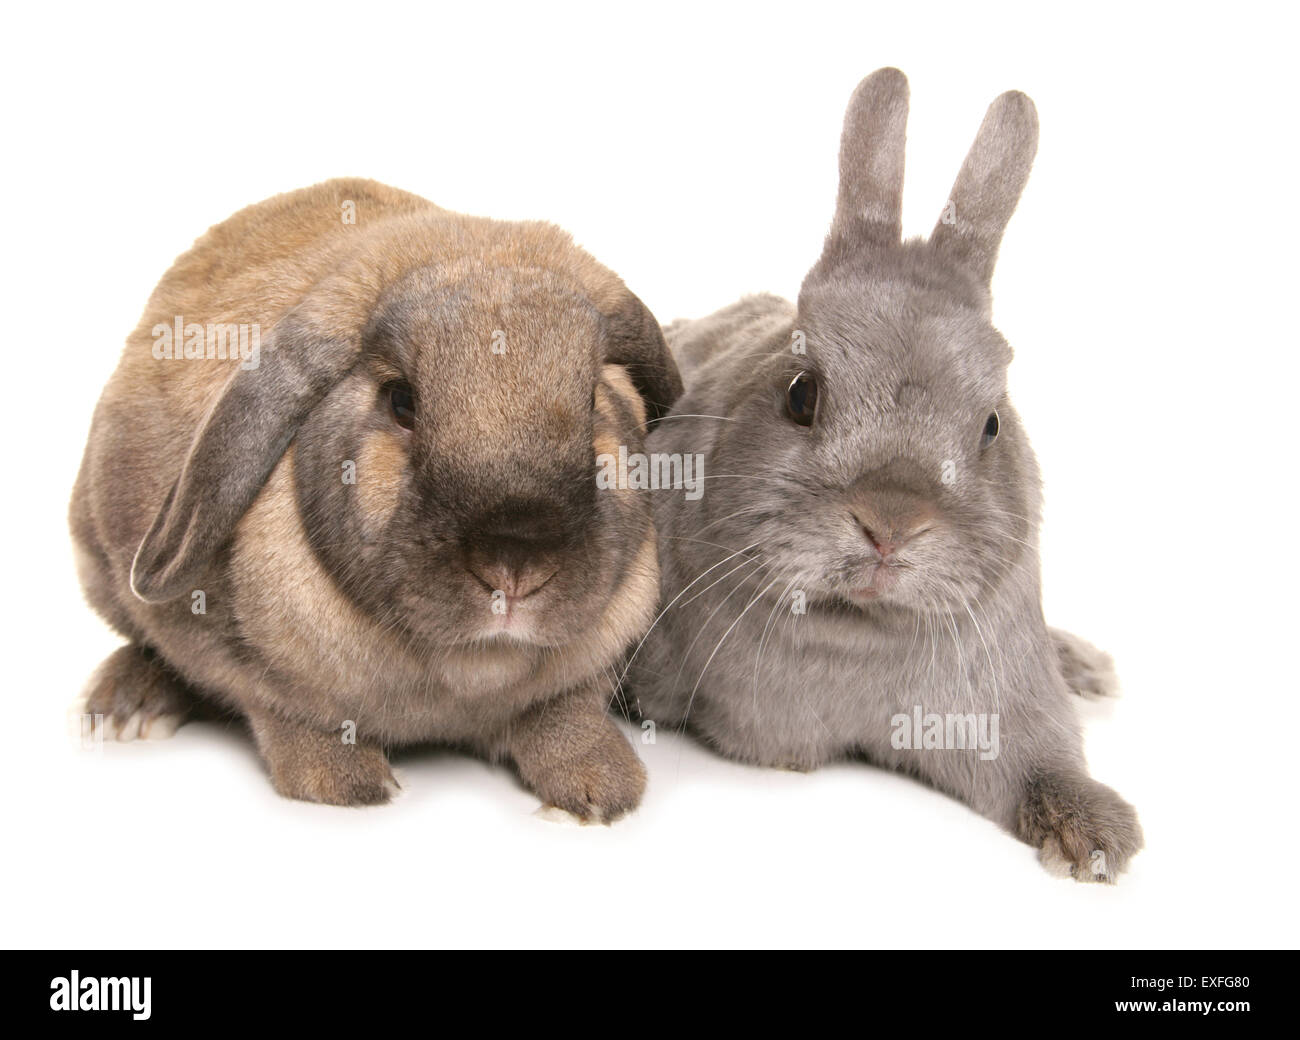 Domestic rabbits Two adults in a studio Stock Photo